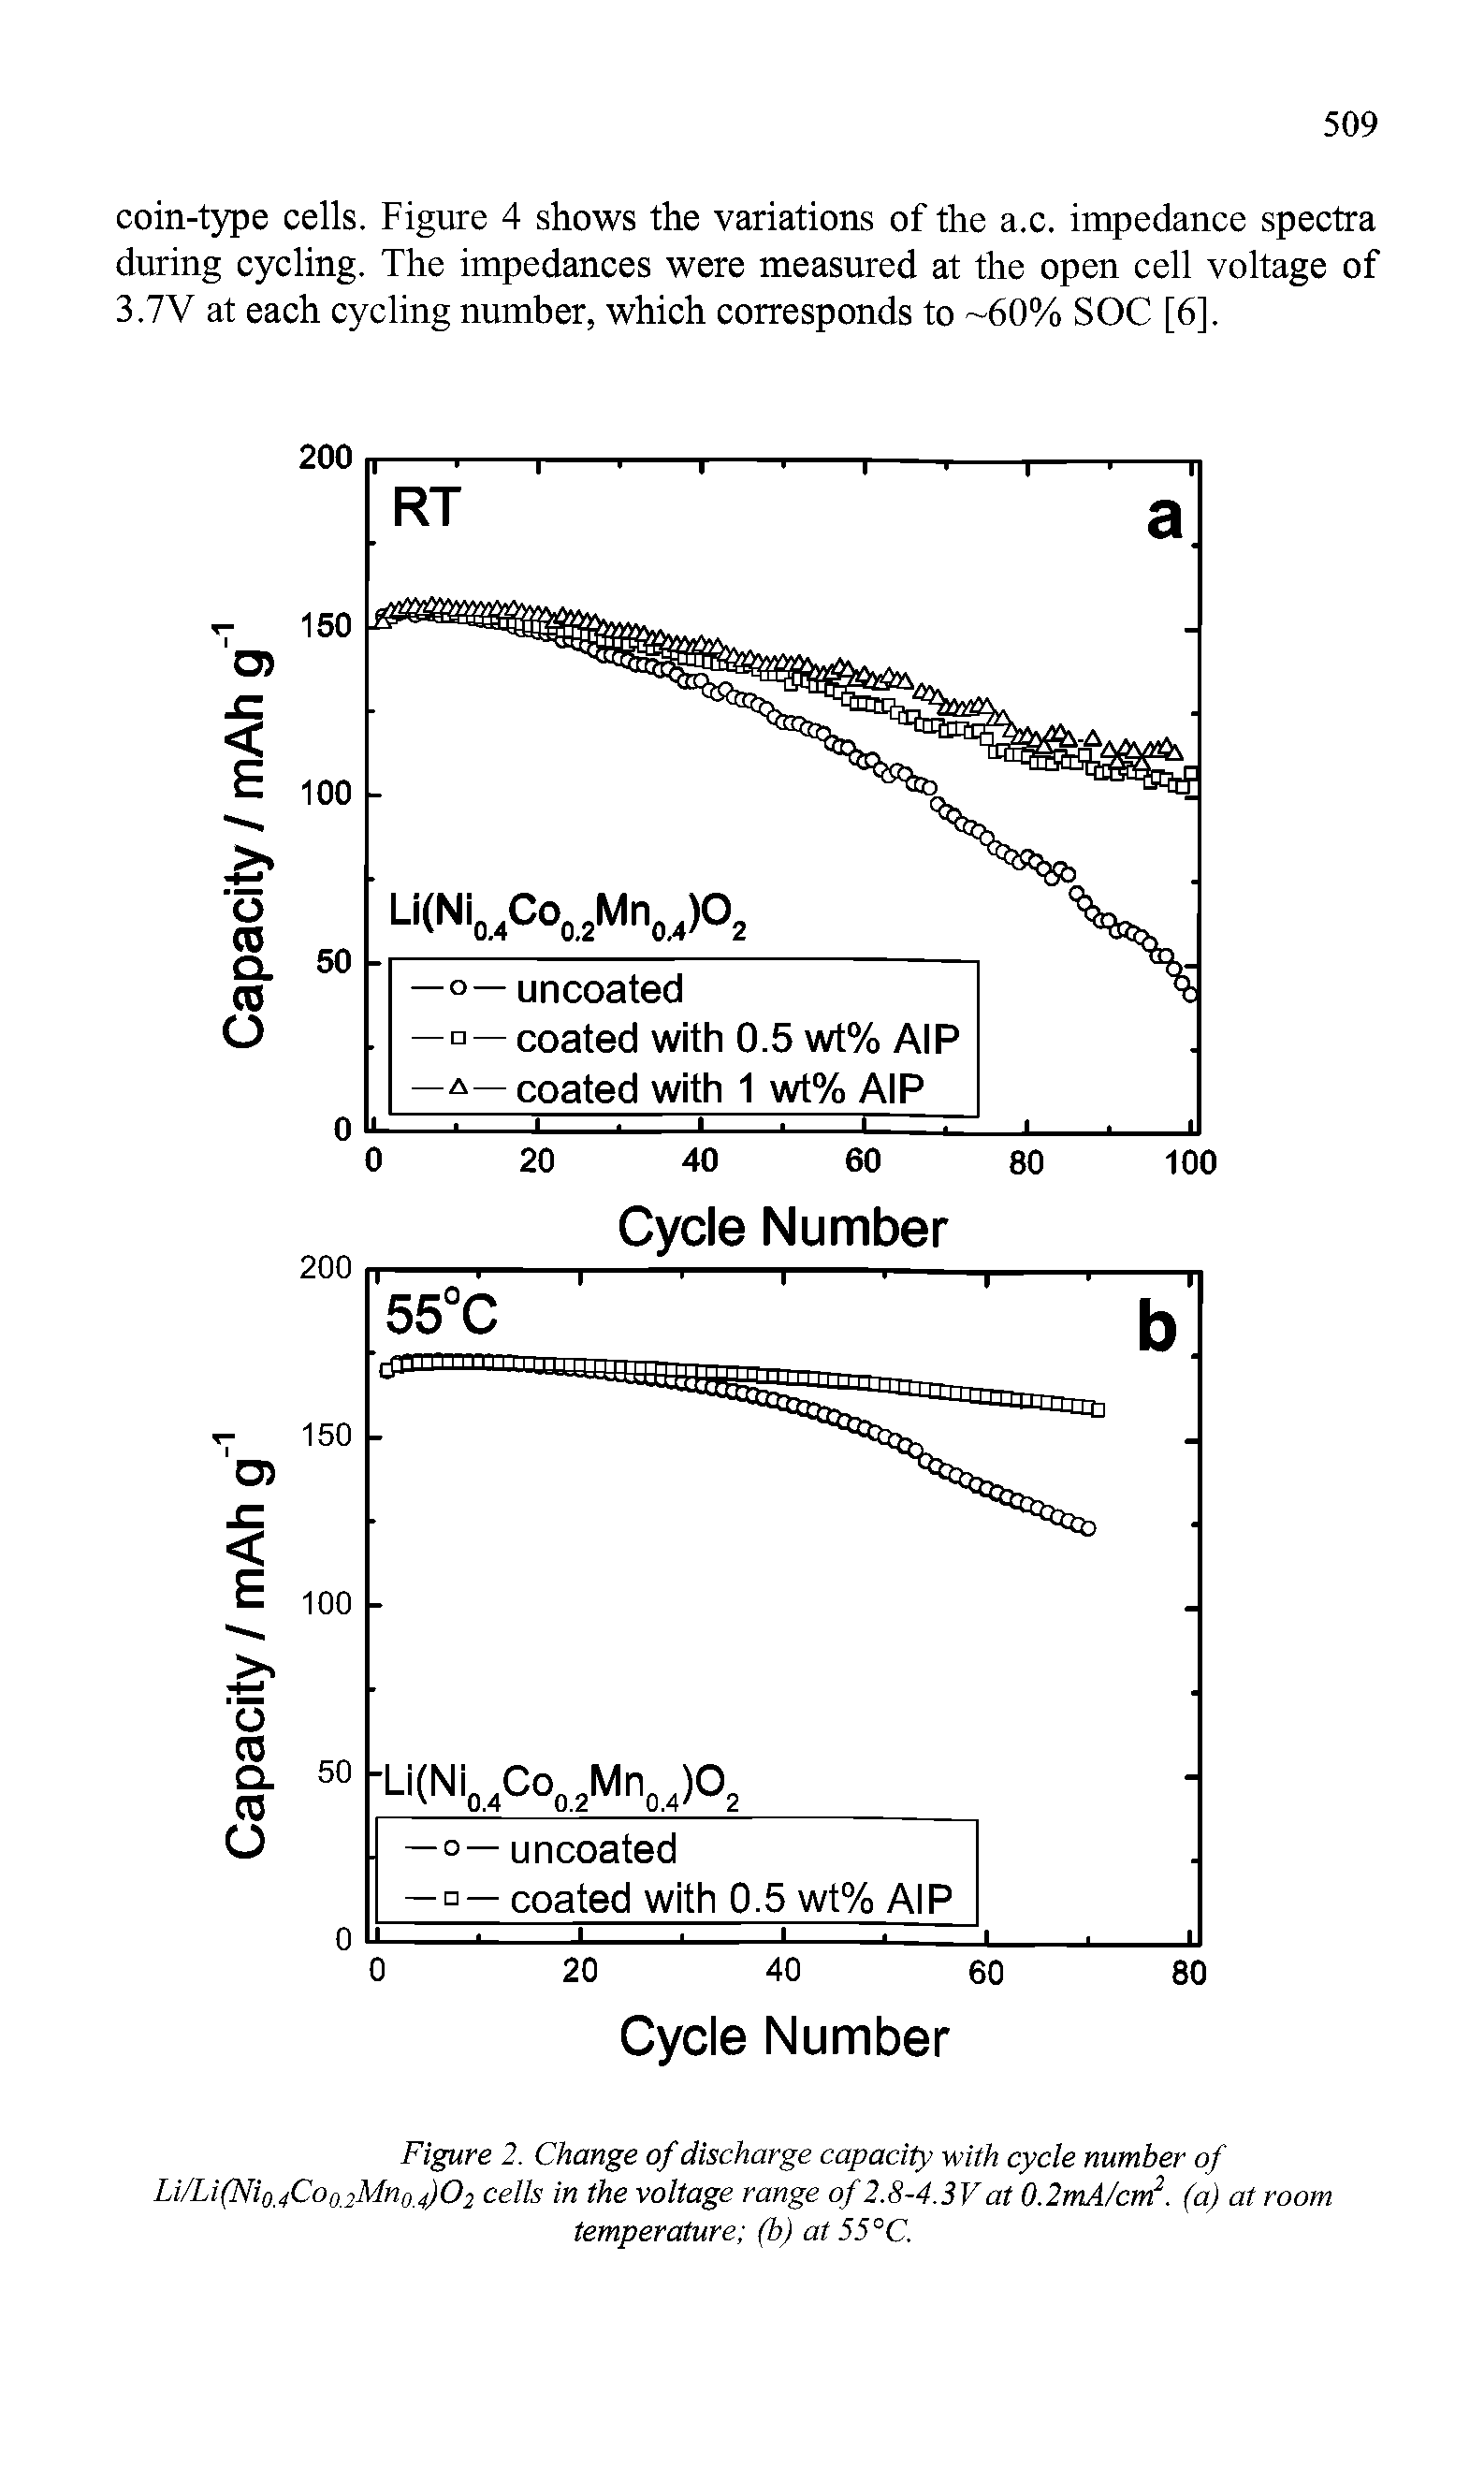 Figure 2. Change of discharge capacity with cycle number of Li/Li(Ni04Co02Mn04)O2 cells in the voltage range of 2.8-4.3Vat 0.2mA/cm2. (a) at room temperature (b) at 55 °C.